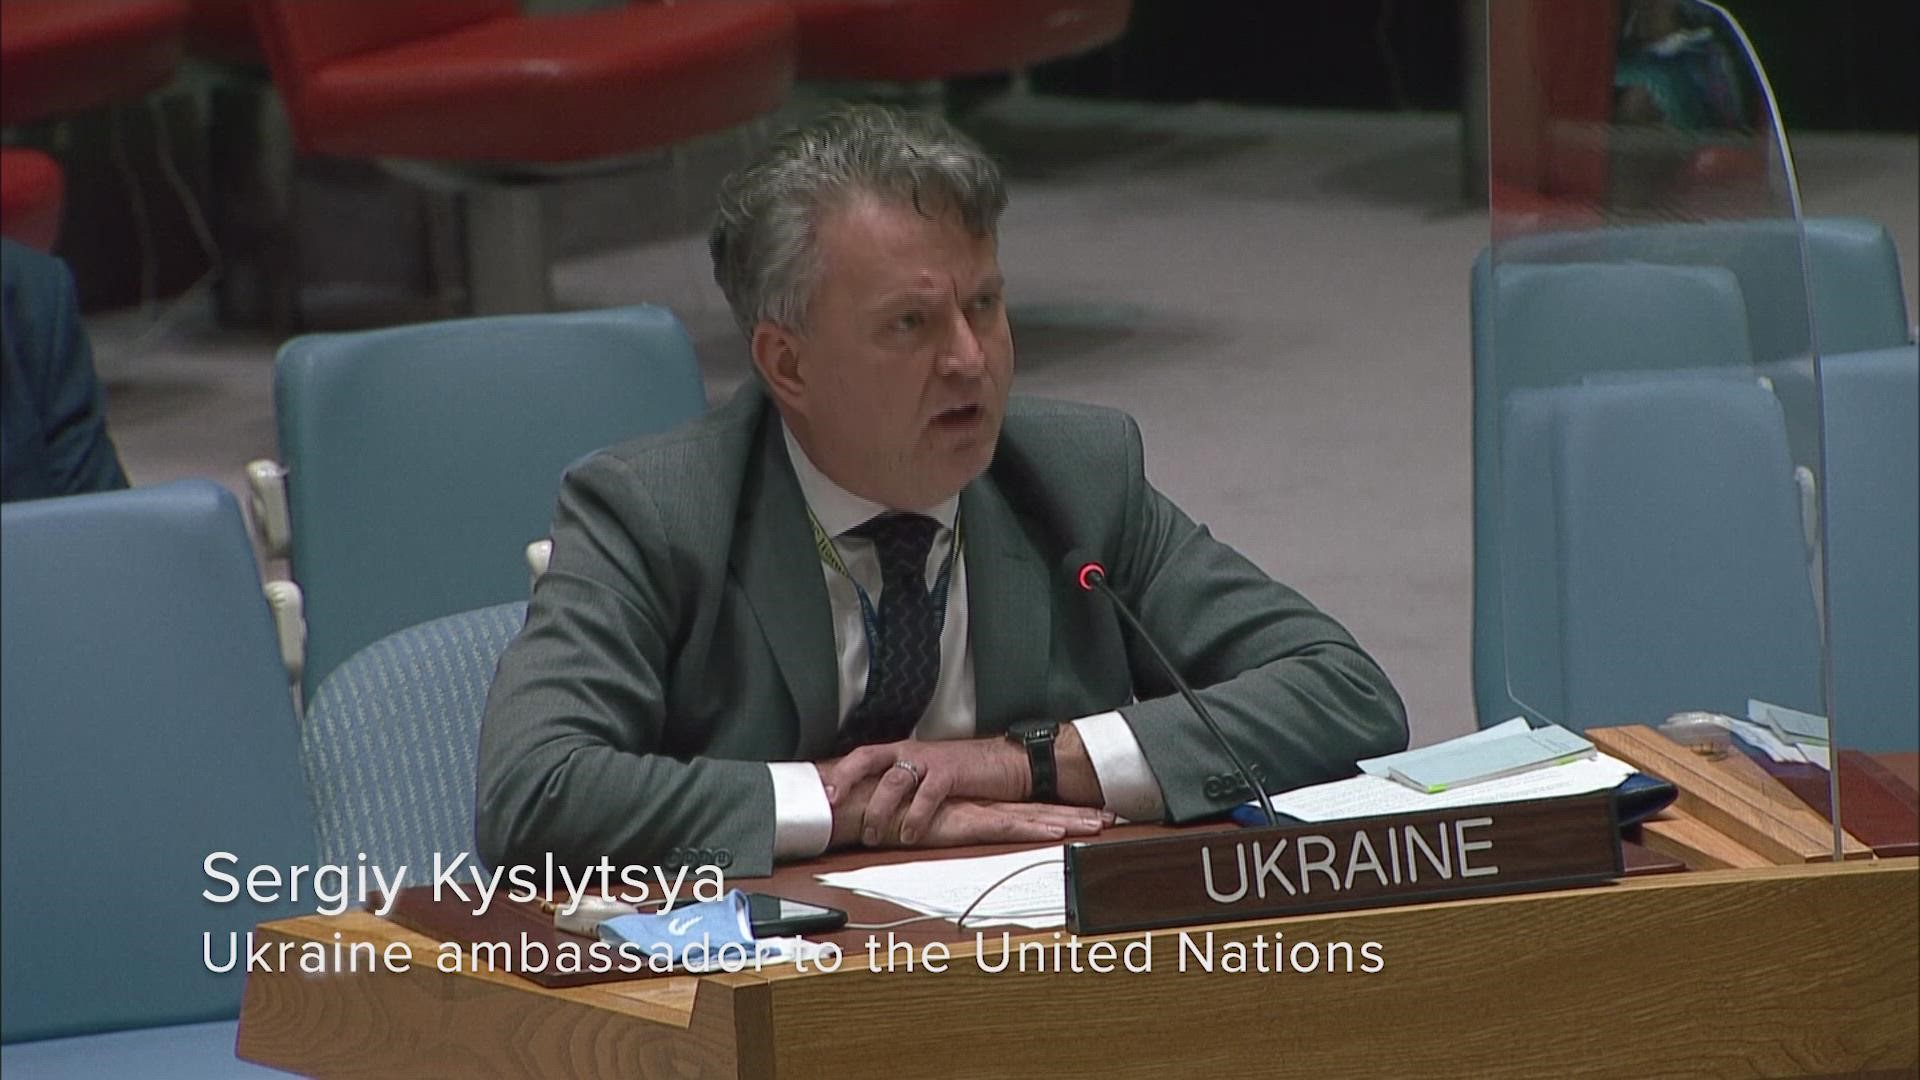 Ukraine’s ambassador at the United Nations has told the Security Council that Russian President Vladimir Putin has “declared war on Ukraine."